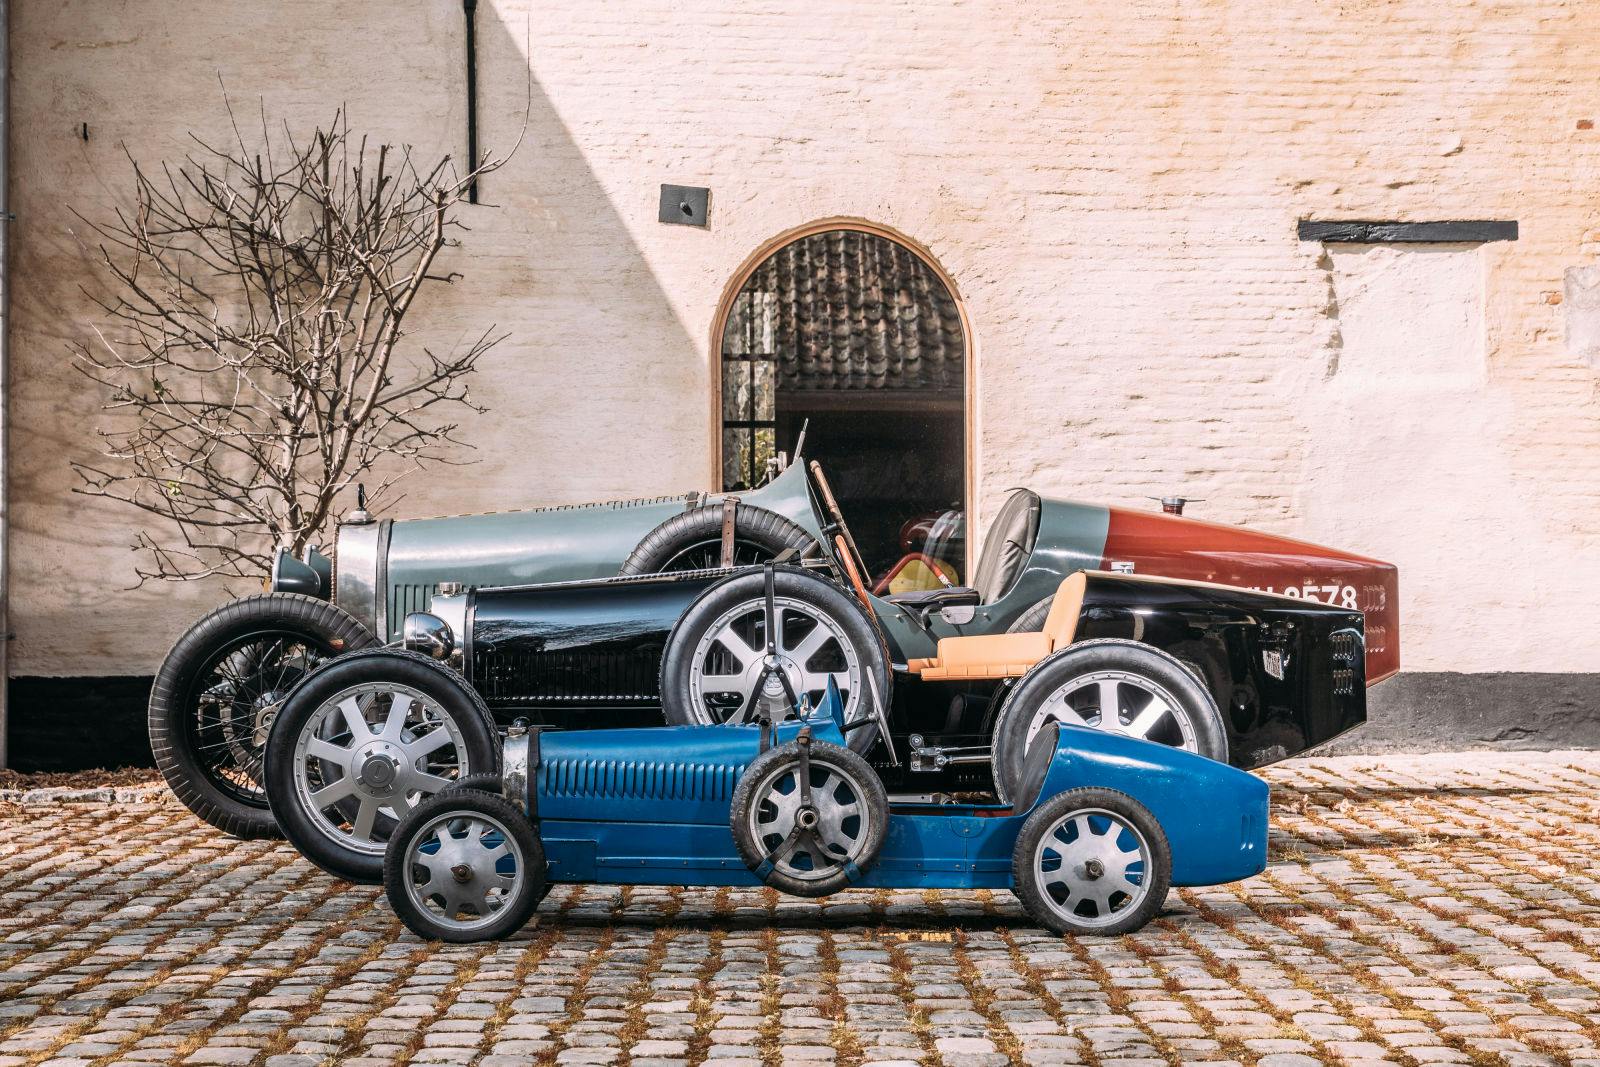 Old meets new – The Bugatti Baby II has been designed to complement the clients existing Bugatti collection.